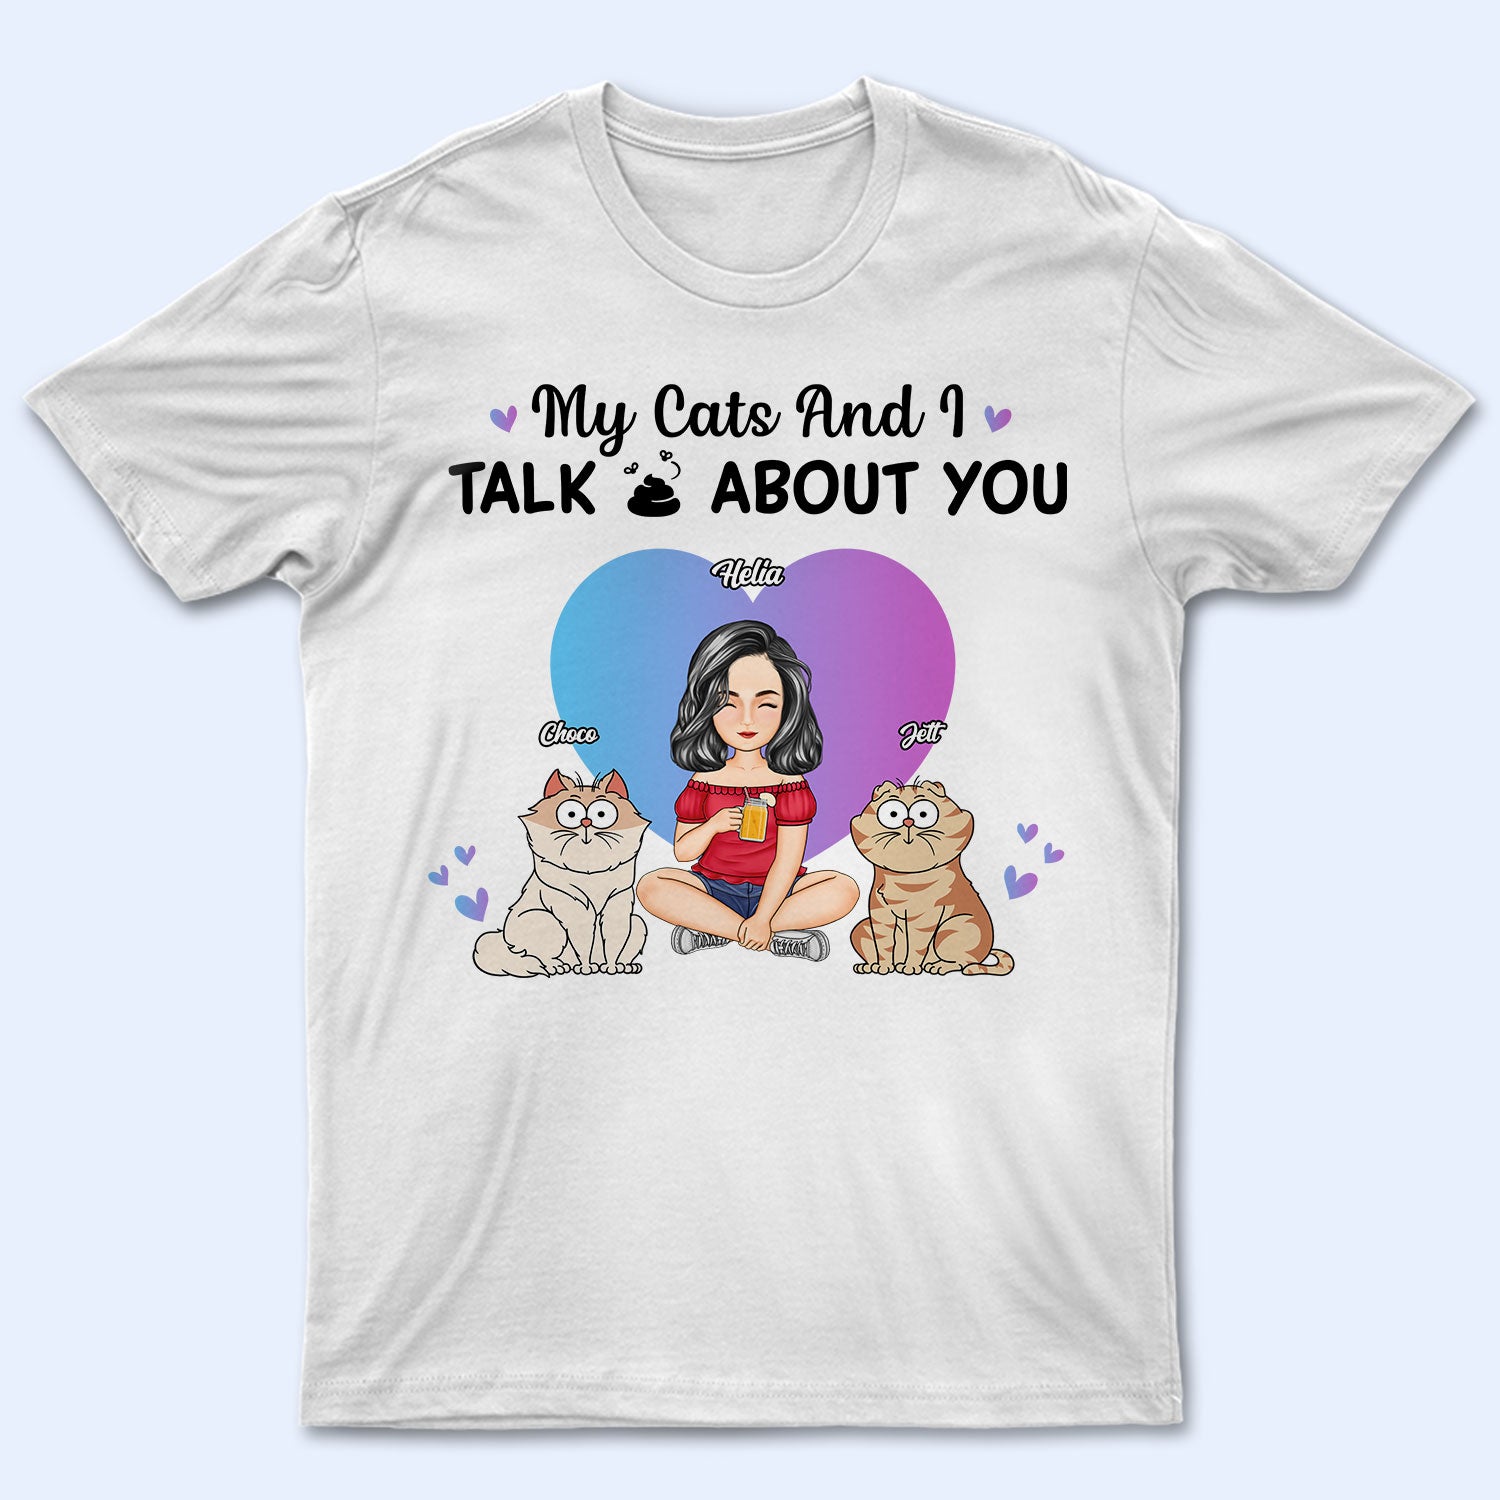 My Cats And I Talk About You - Funny Gift For Cat Lovers - Personalized T Shirt